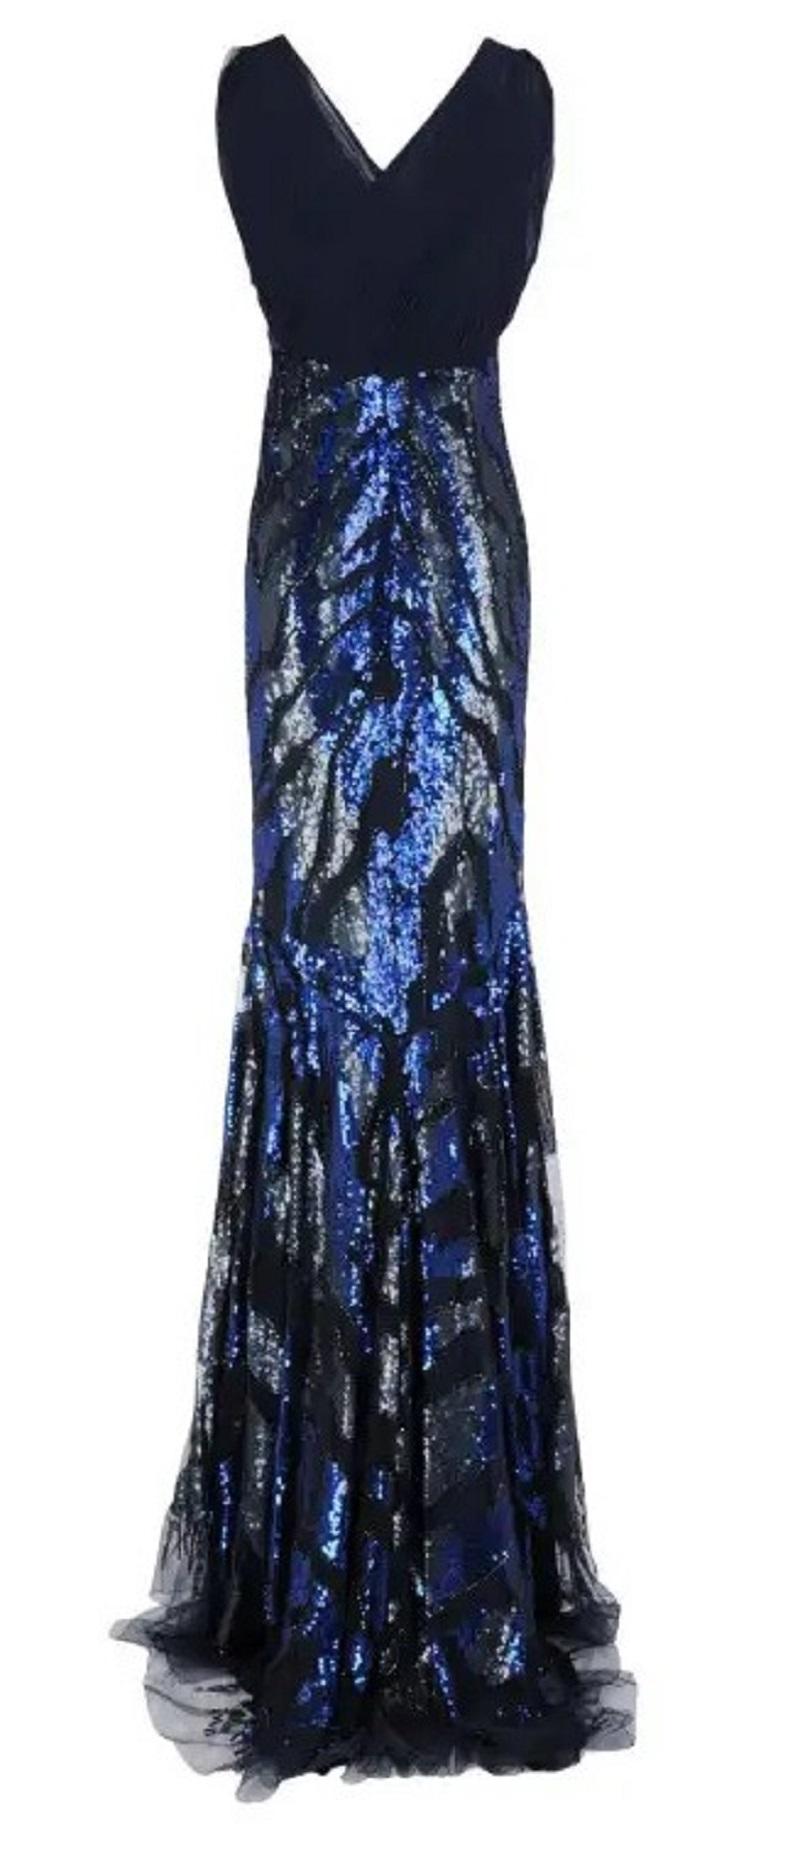 Roberto Cavalli Blue Gray Fully Embellished Zebra Print Dress Gown
Italian Size 42, US 6.
Blue and Cool Gray Sequin Embellishment over the Black Tulle, Double Lined, Zip Closure, Stretchy.
Rosario Dawson attended the LA Premiere of her new movie